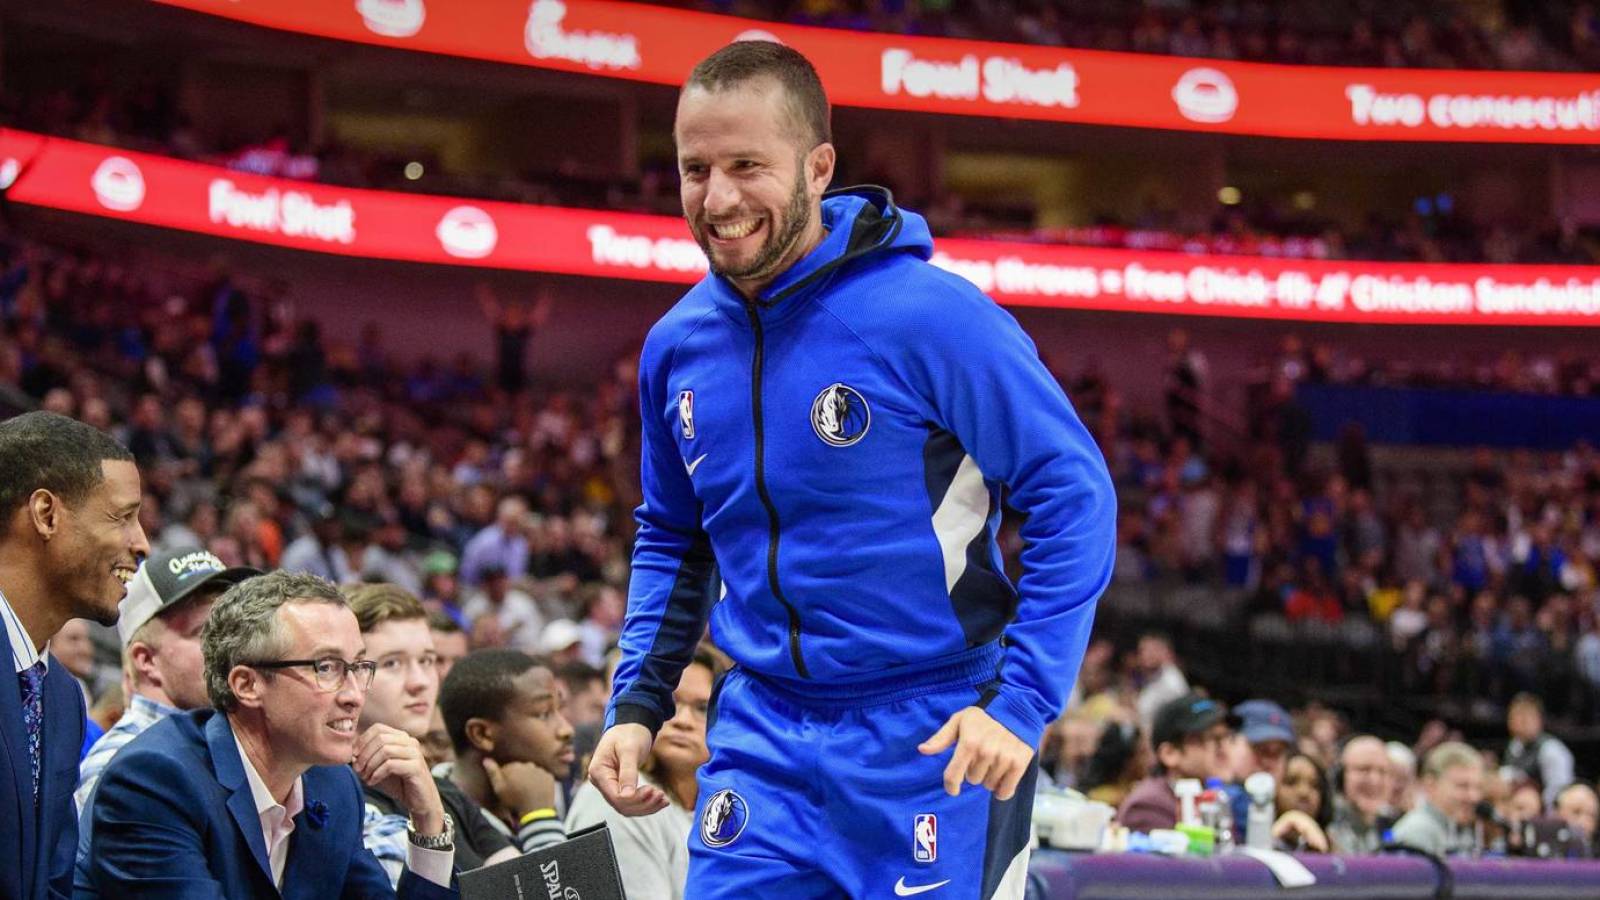 J.J. Barea dating Miss Universe, The Kardashian Effect to be tested